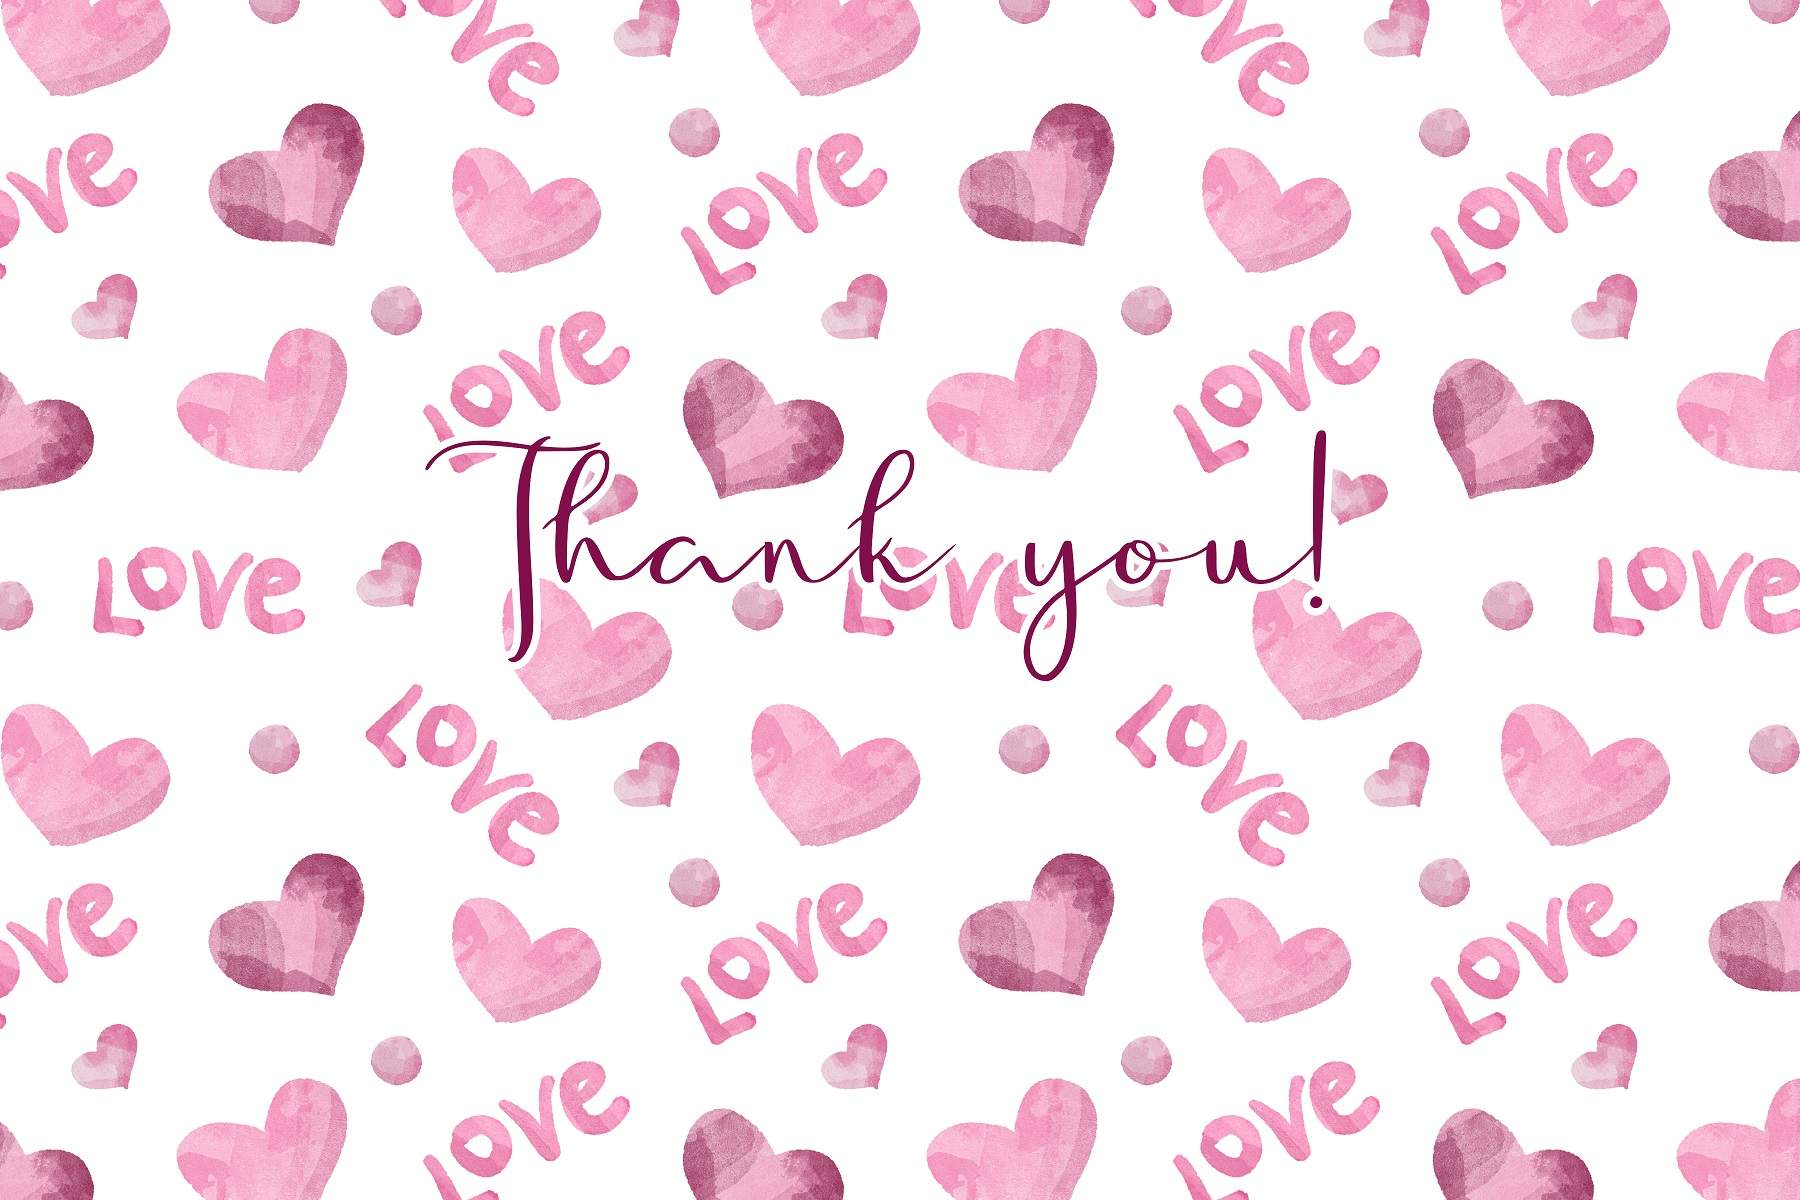 Thank card with pink hearts on a white background.